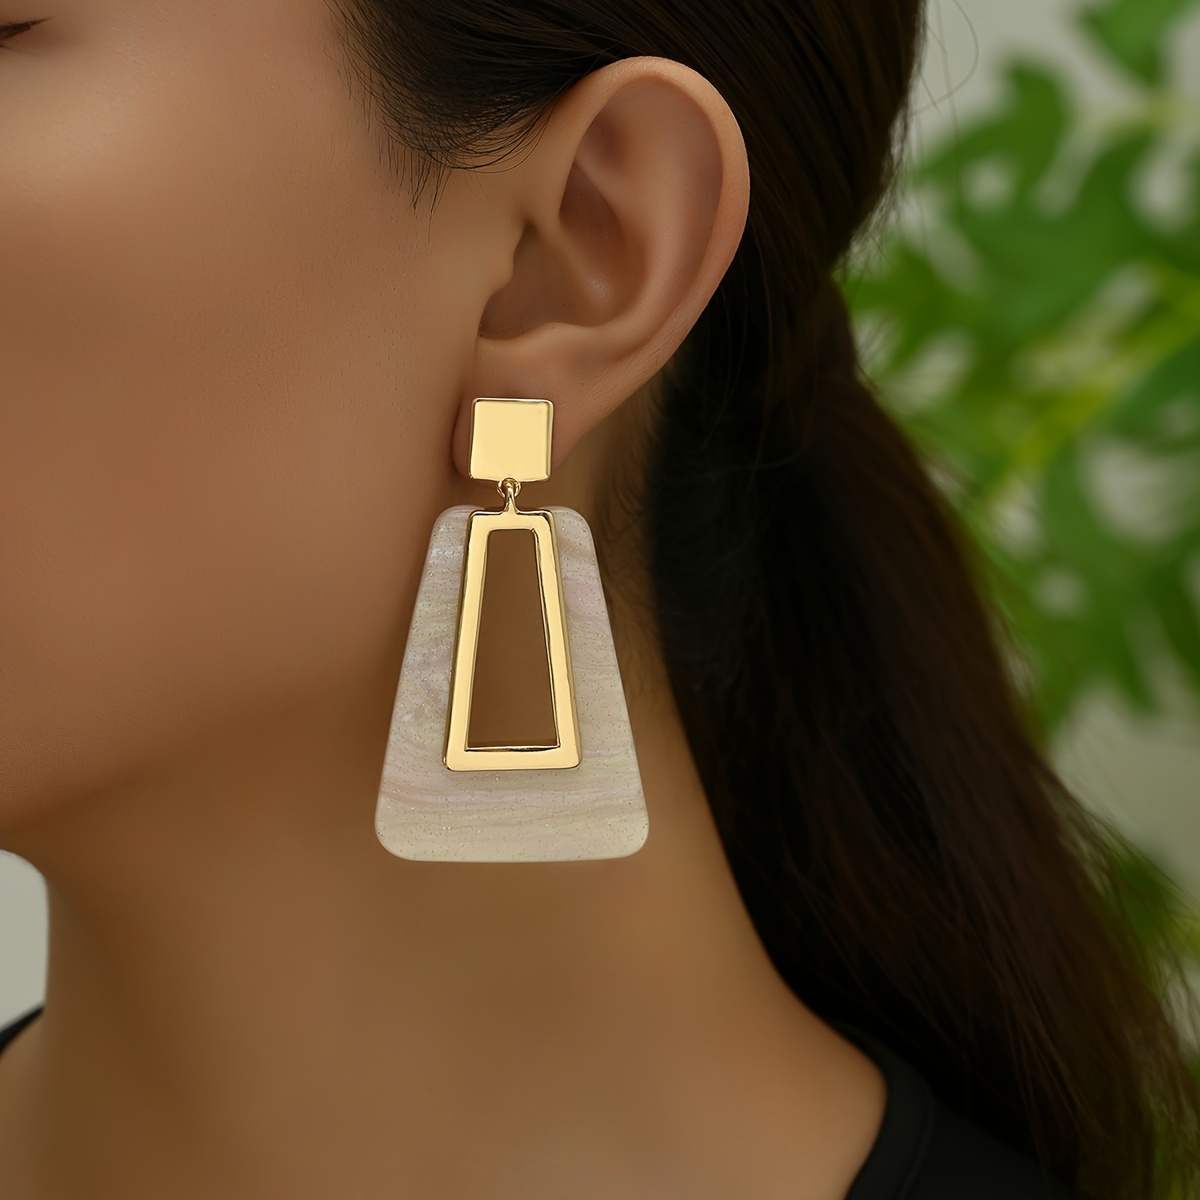 

Elegant Dangle Earrings 18k Gold Plated Hollow Geometry Design Match Daily Outfits Party Accessories Fashionable Jewelry For Female